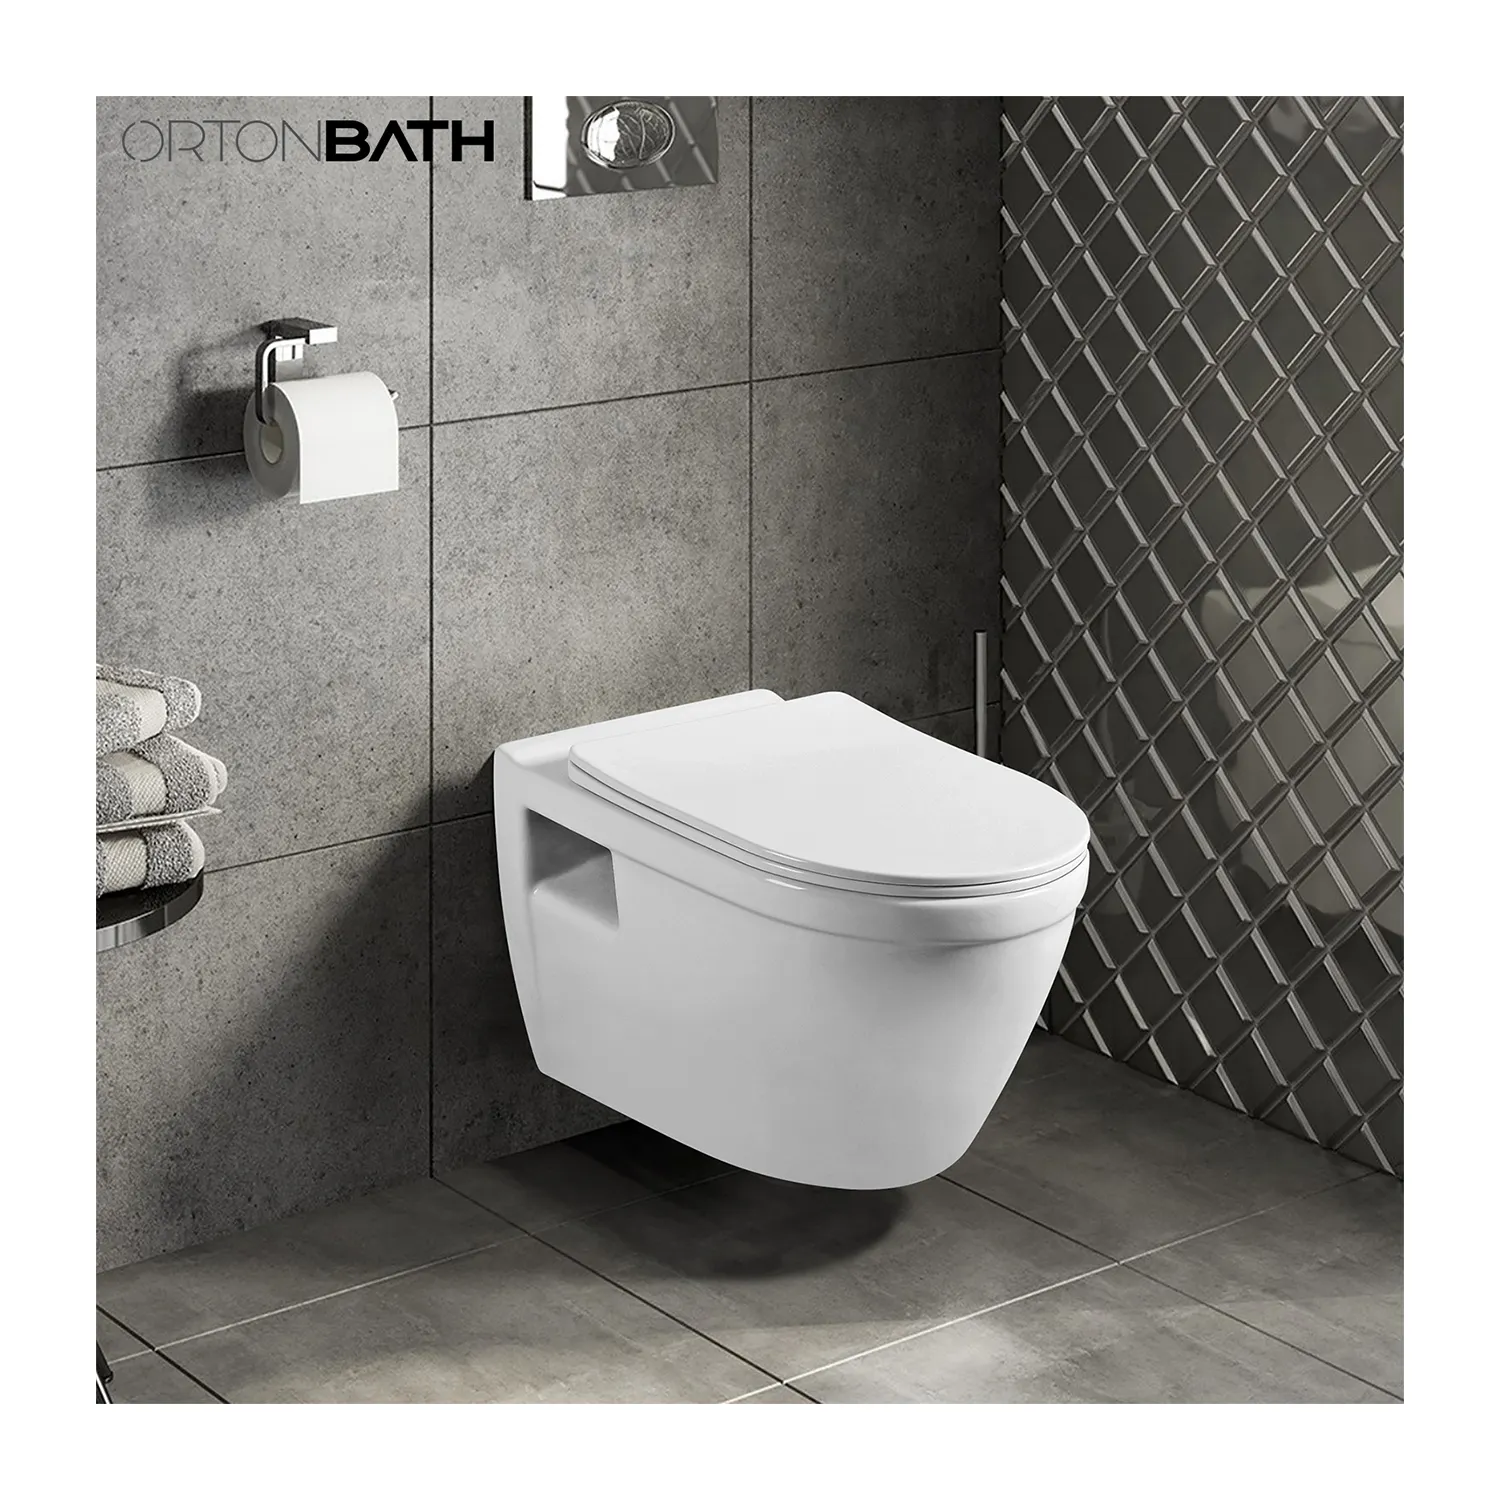 ORTONBATH Dual Flush Concealed Wc Cistern Wall Hung Toilet with Soft Close Seat and Cover